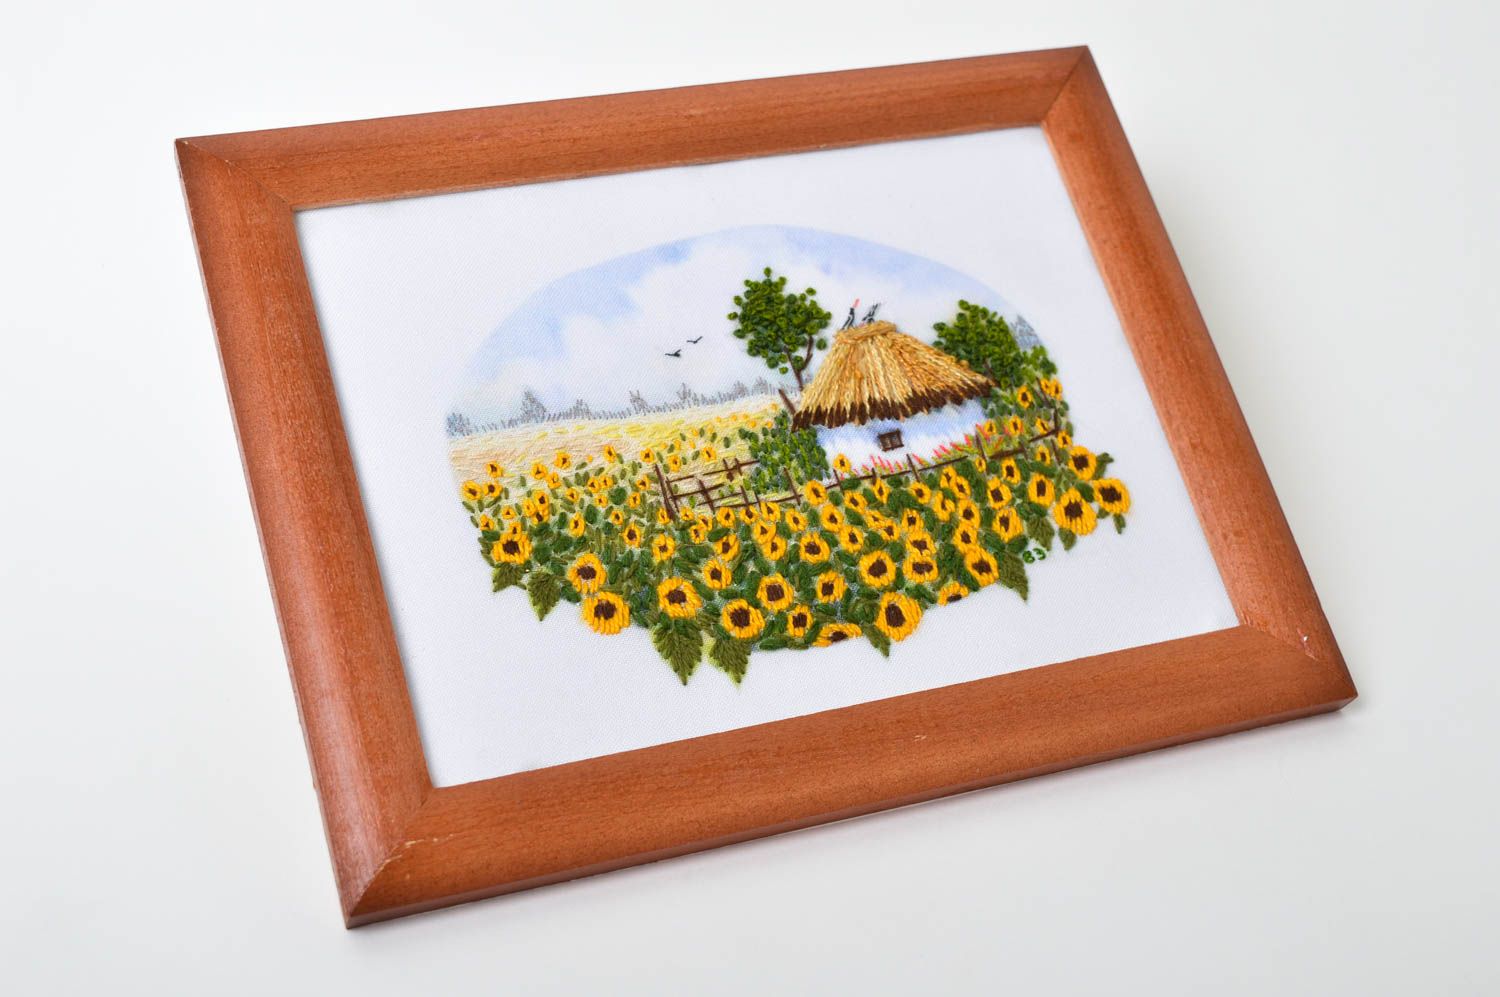 Handmade wall picture with embroidery stitch embroidery decorative use only photo 3